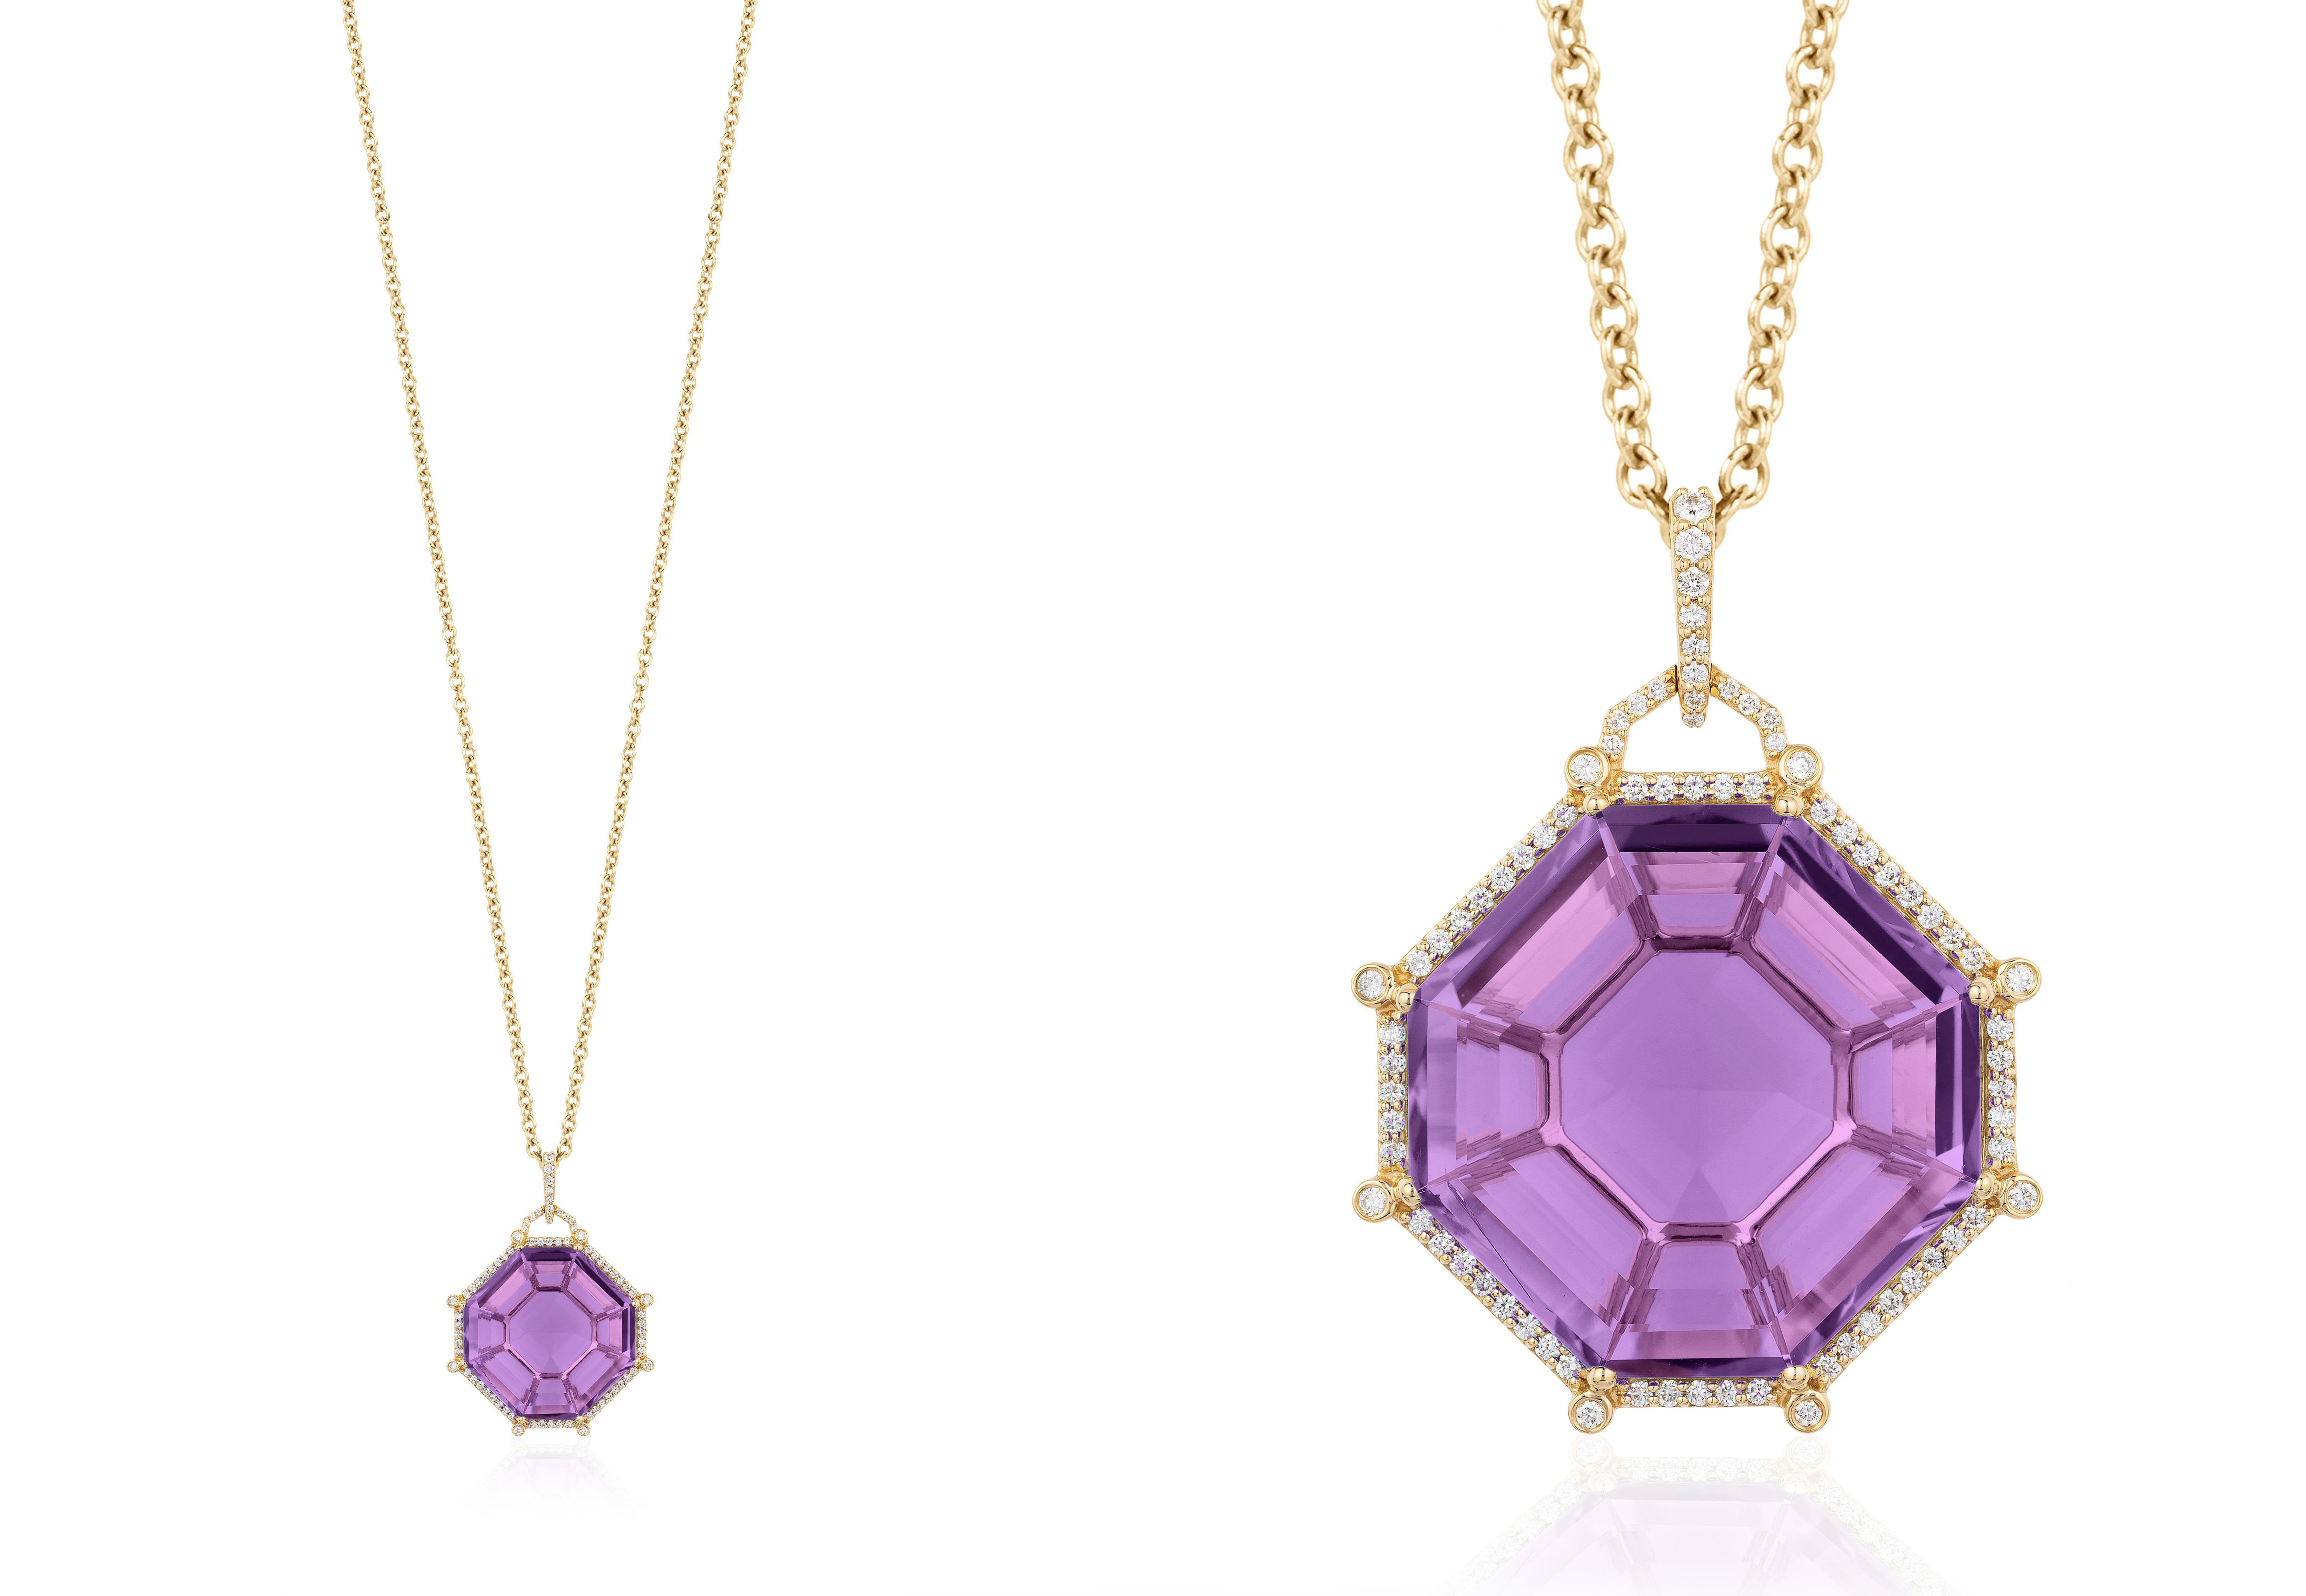 Amethyst Octagon Pendant with Diamonds in 18K Yellow Gold from 'Gossip' Collection
Stone Size: 22.5 x 22.5 mm
Diamonds: G-H / VS, Approx Wt: 0.46 Cts